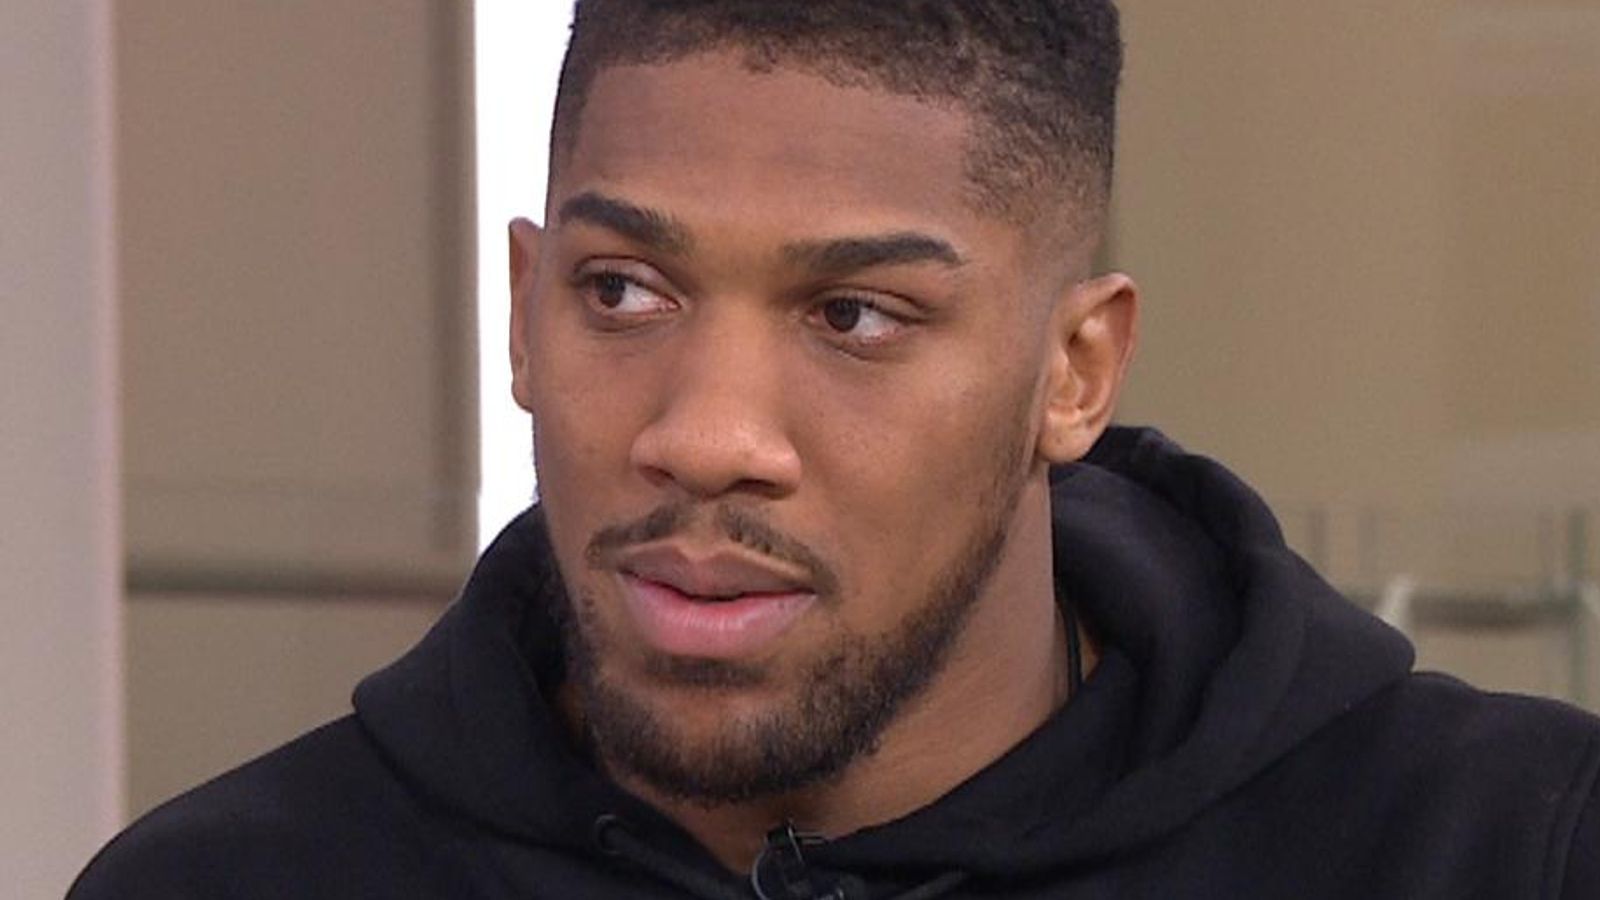 Anthony Joshua urges young people to reject street violence | UK News ...